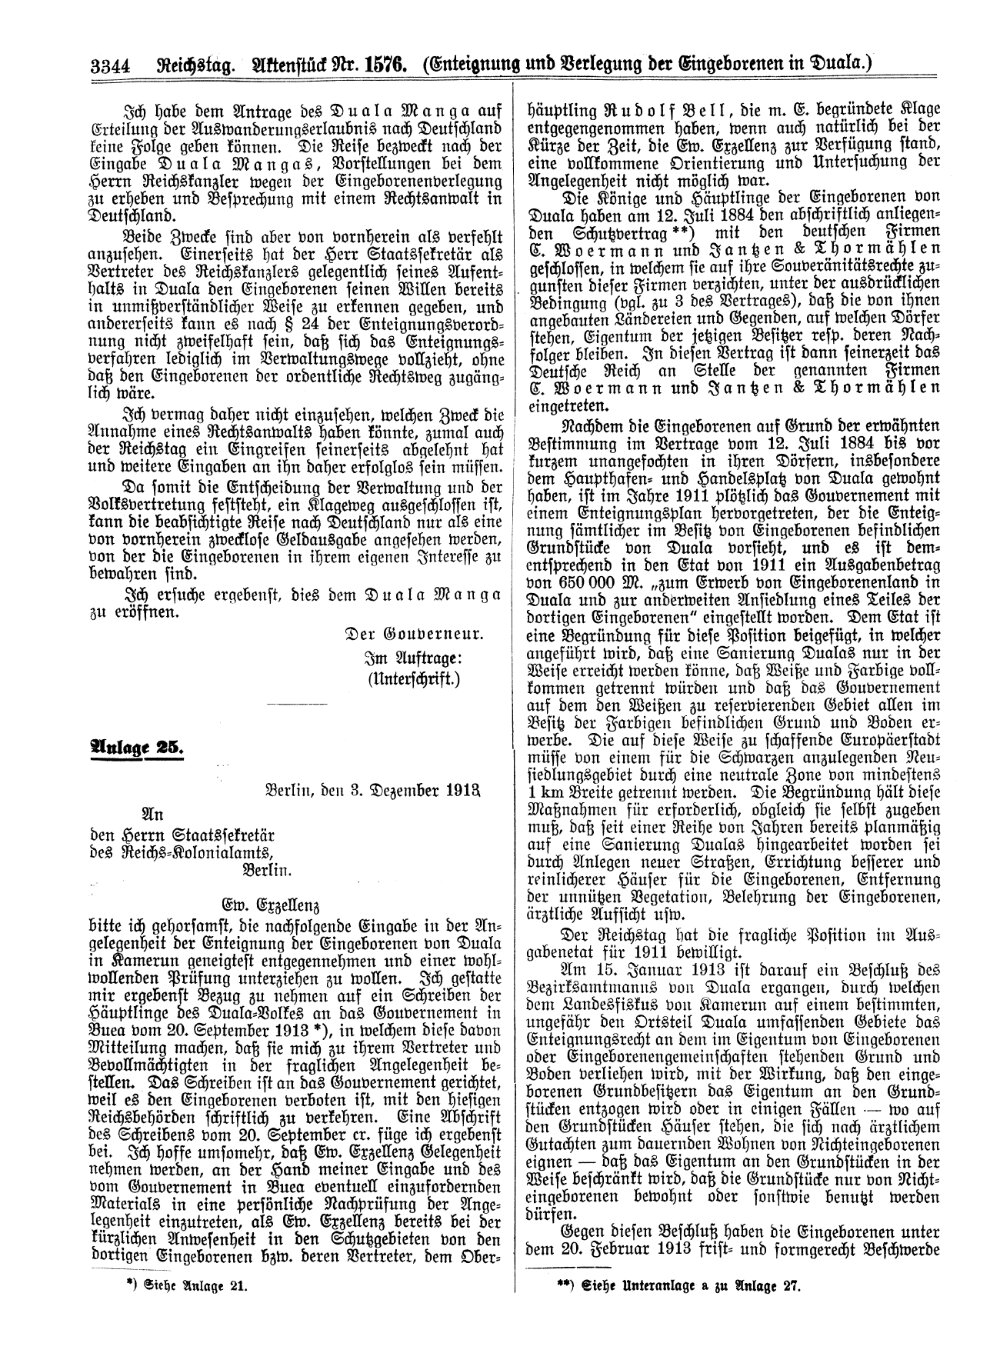 Scan of page 3344